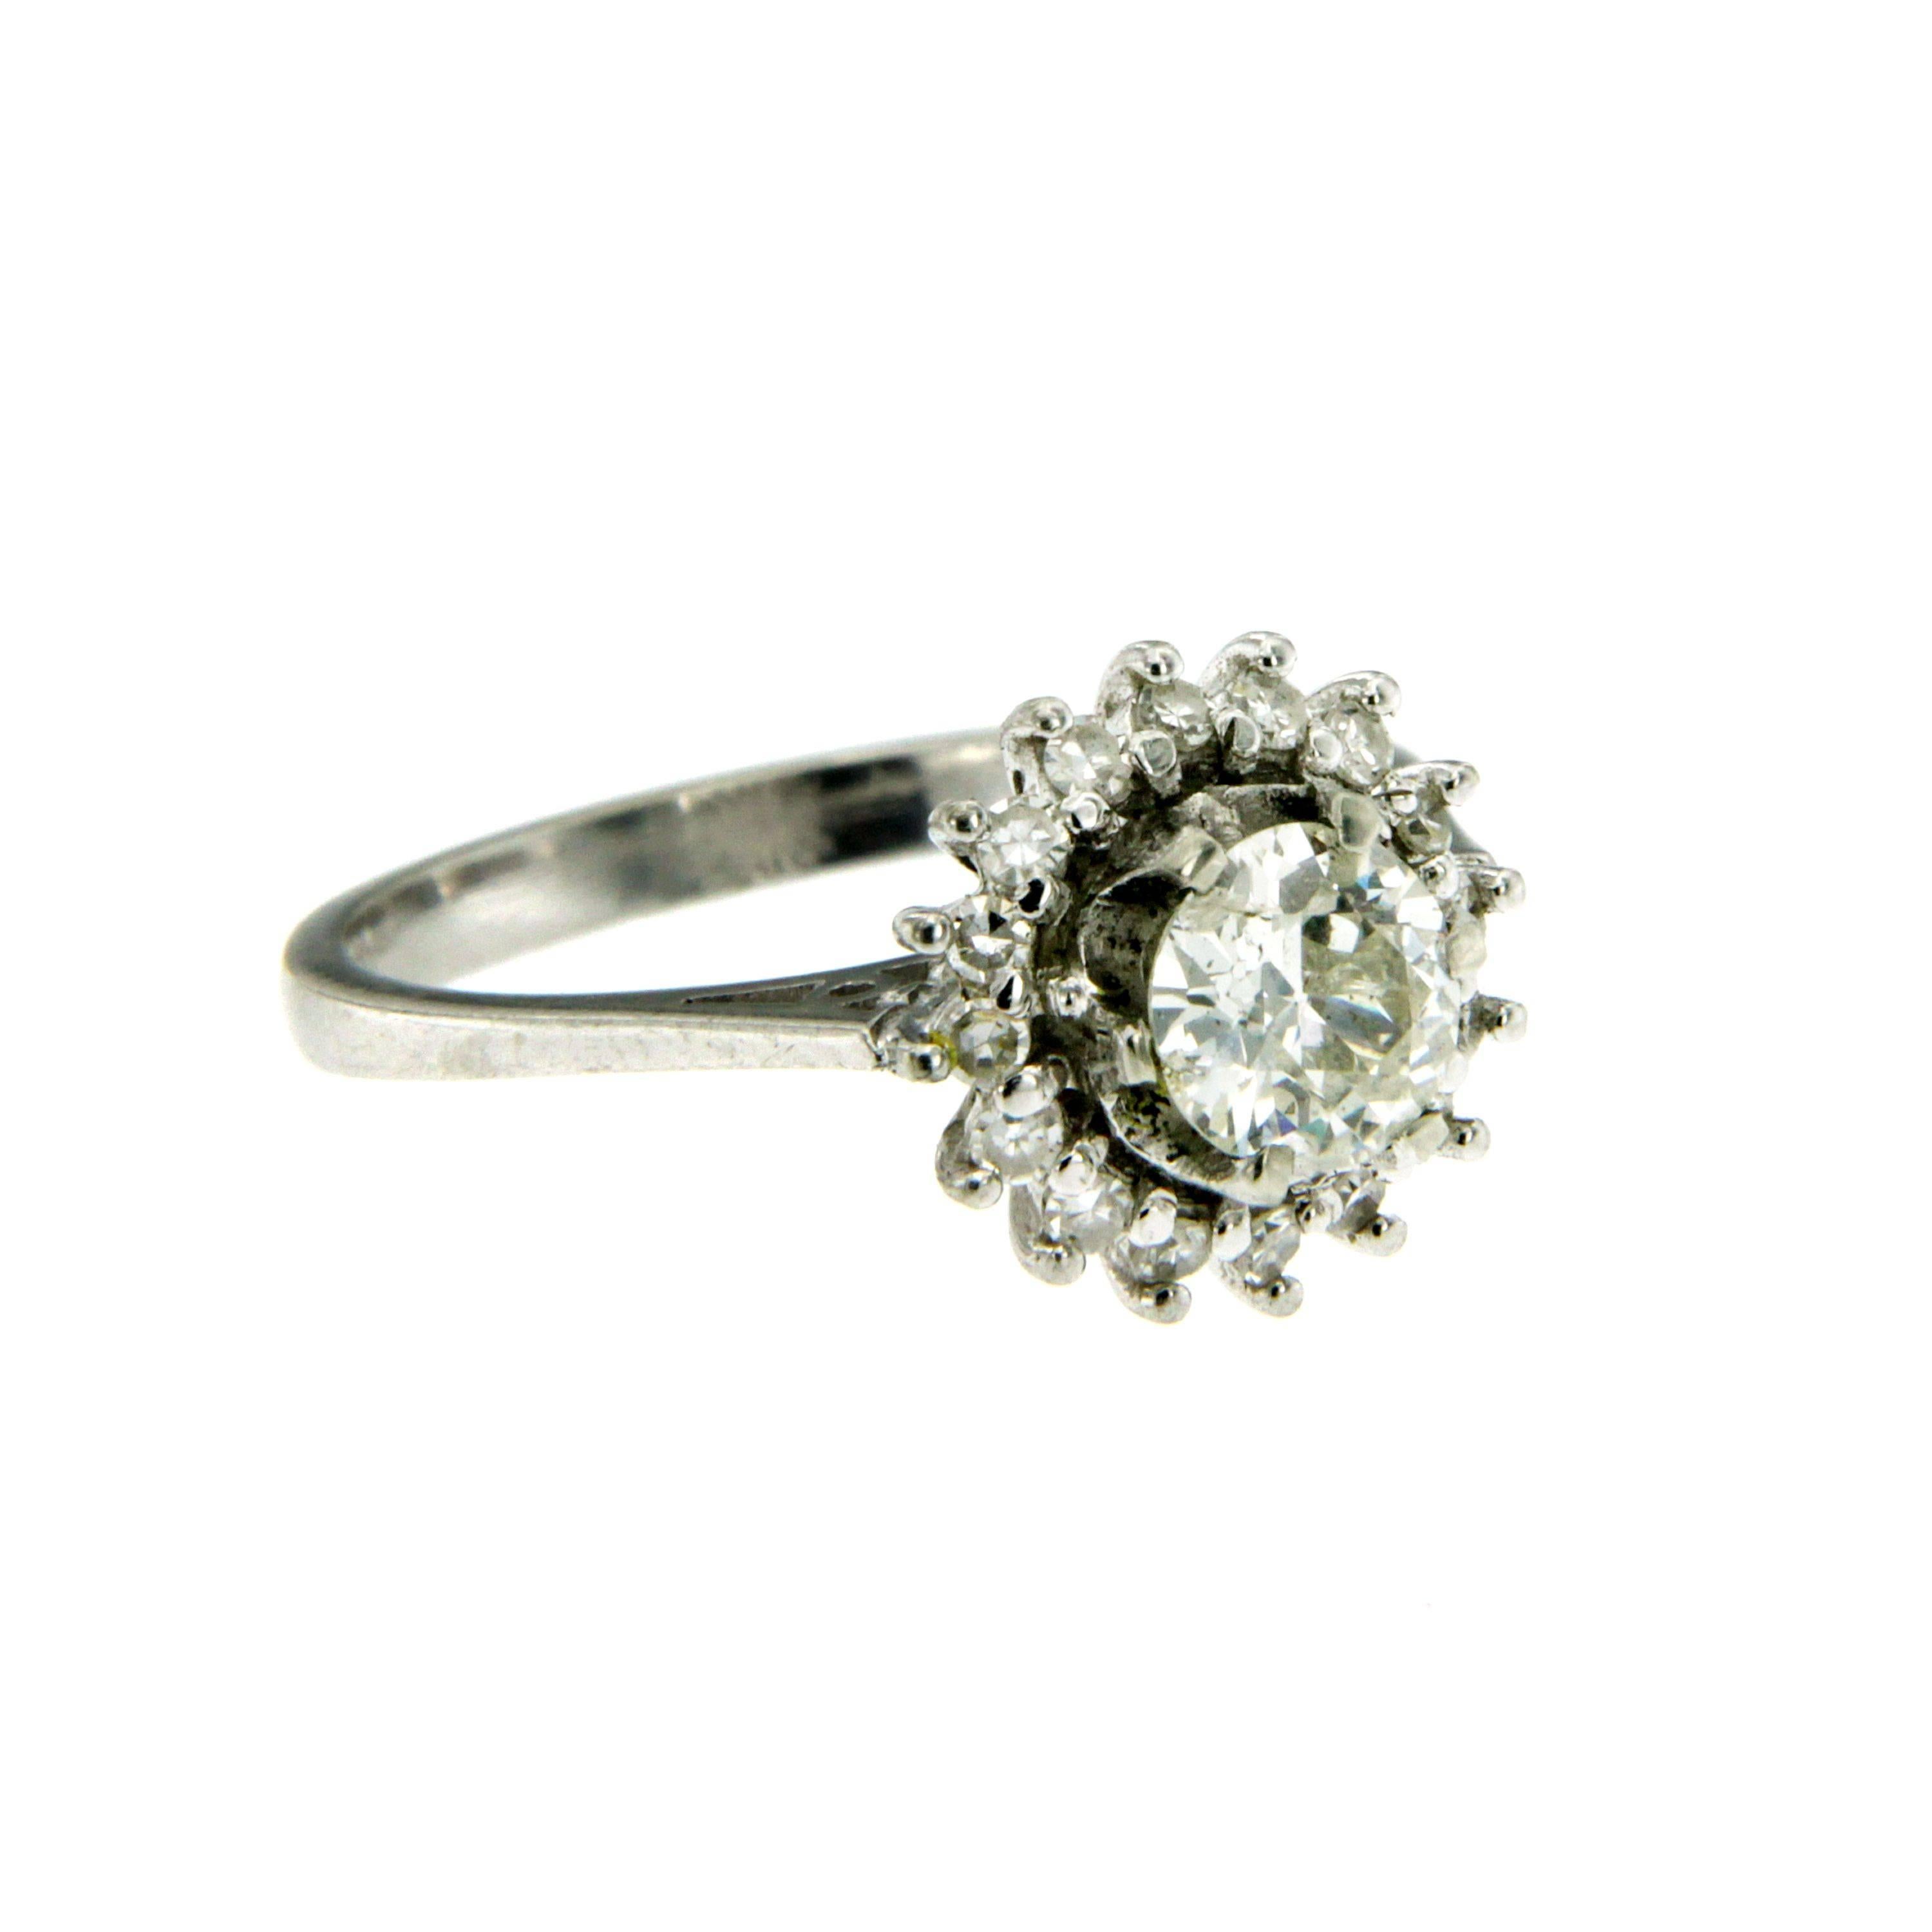 A beautiful 18k white Gold ring featuring a flower design set in the center with an old mine cut diamond weighing 1 ct H color VS clarity, framed by 0.15 carat of old cut diamonds.
Circa 1930

CONDITION: Pre-owned - Excellent
METAL: 18k Gold
GEM